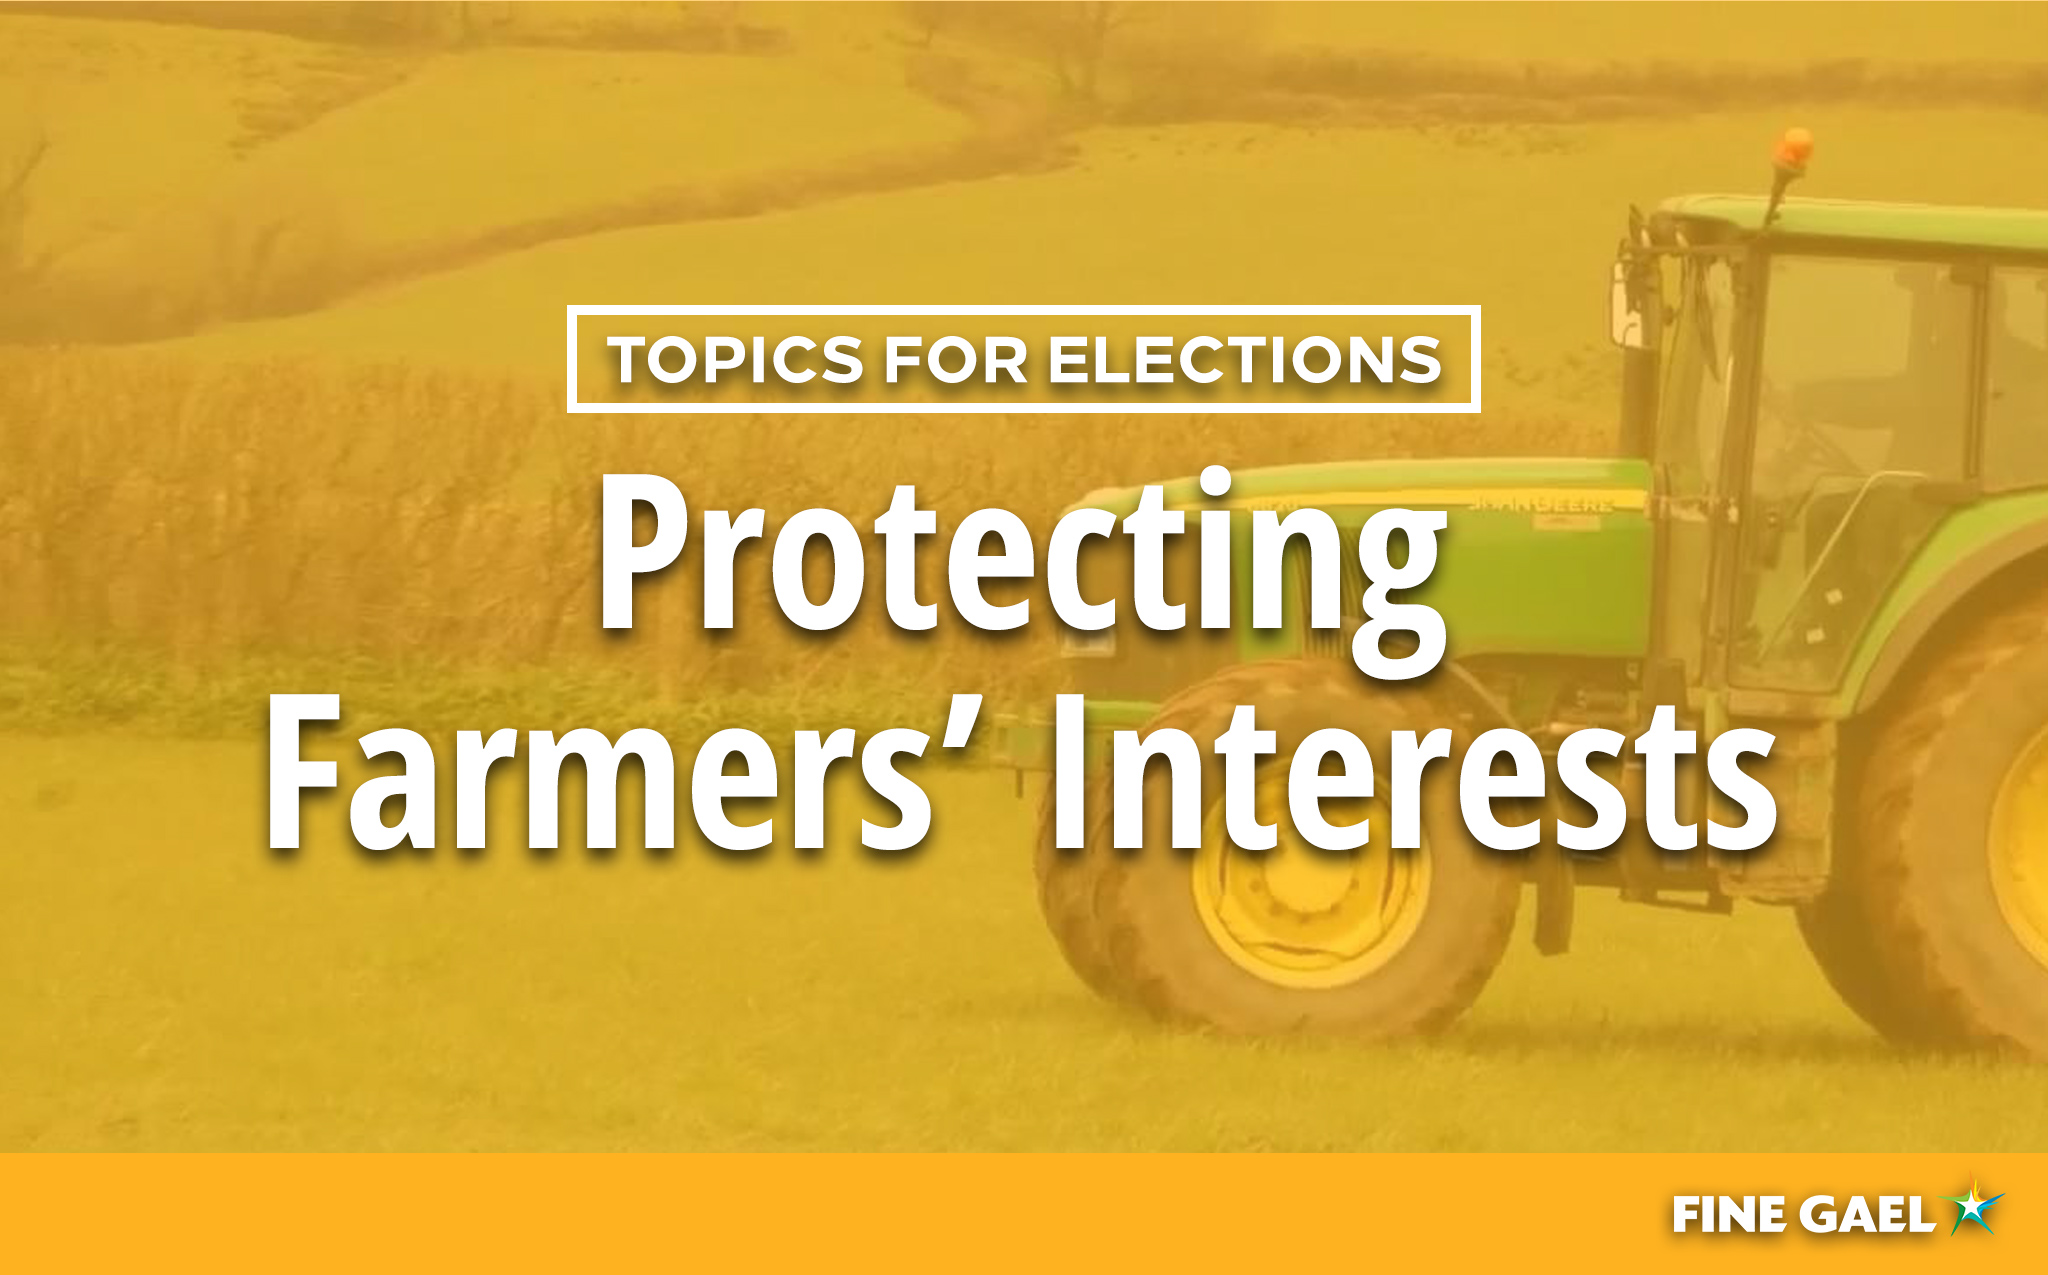 Topics for Elections - Farmers